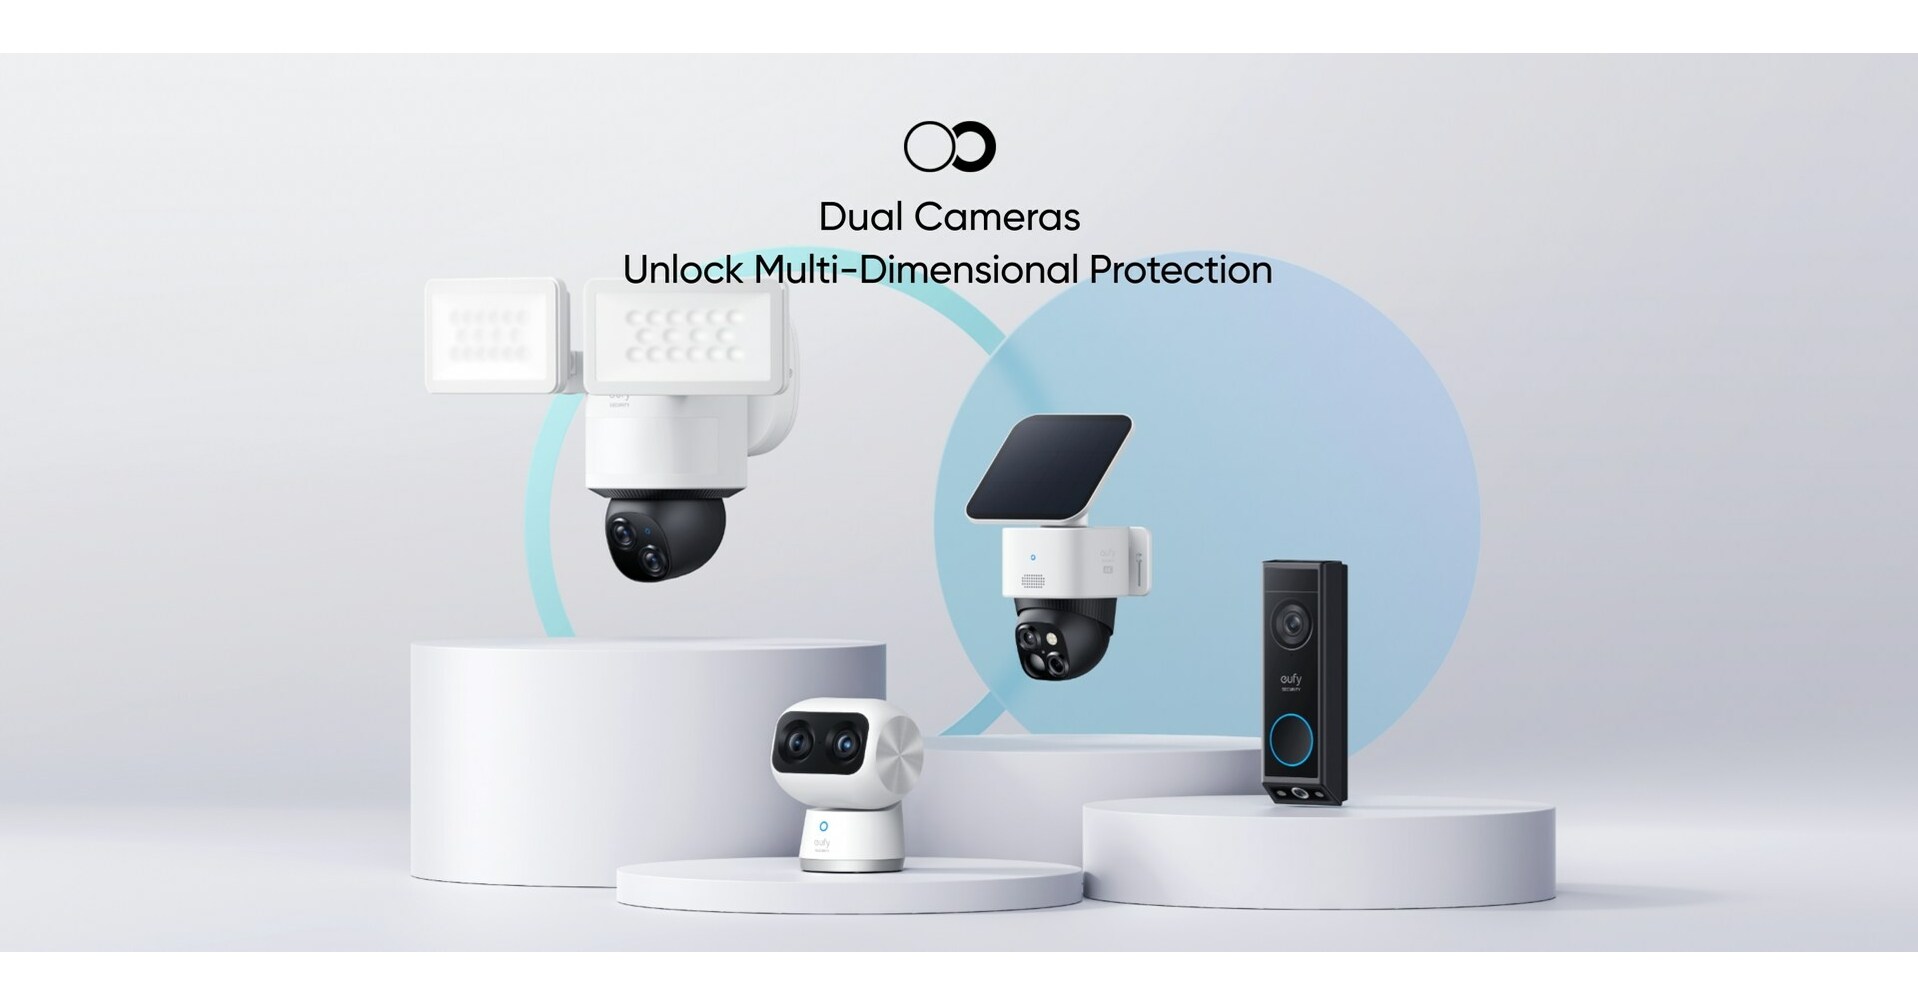 Eufy Introduces Its First Dual Camera Smart Video Doorbell